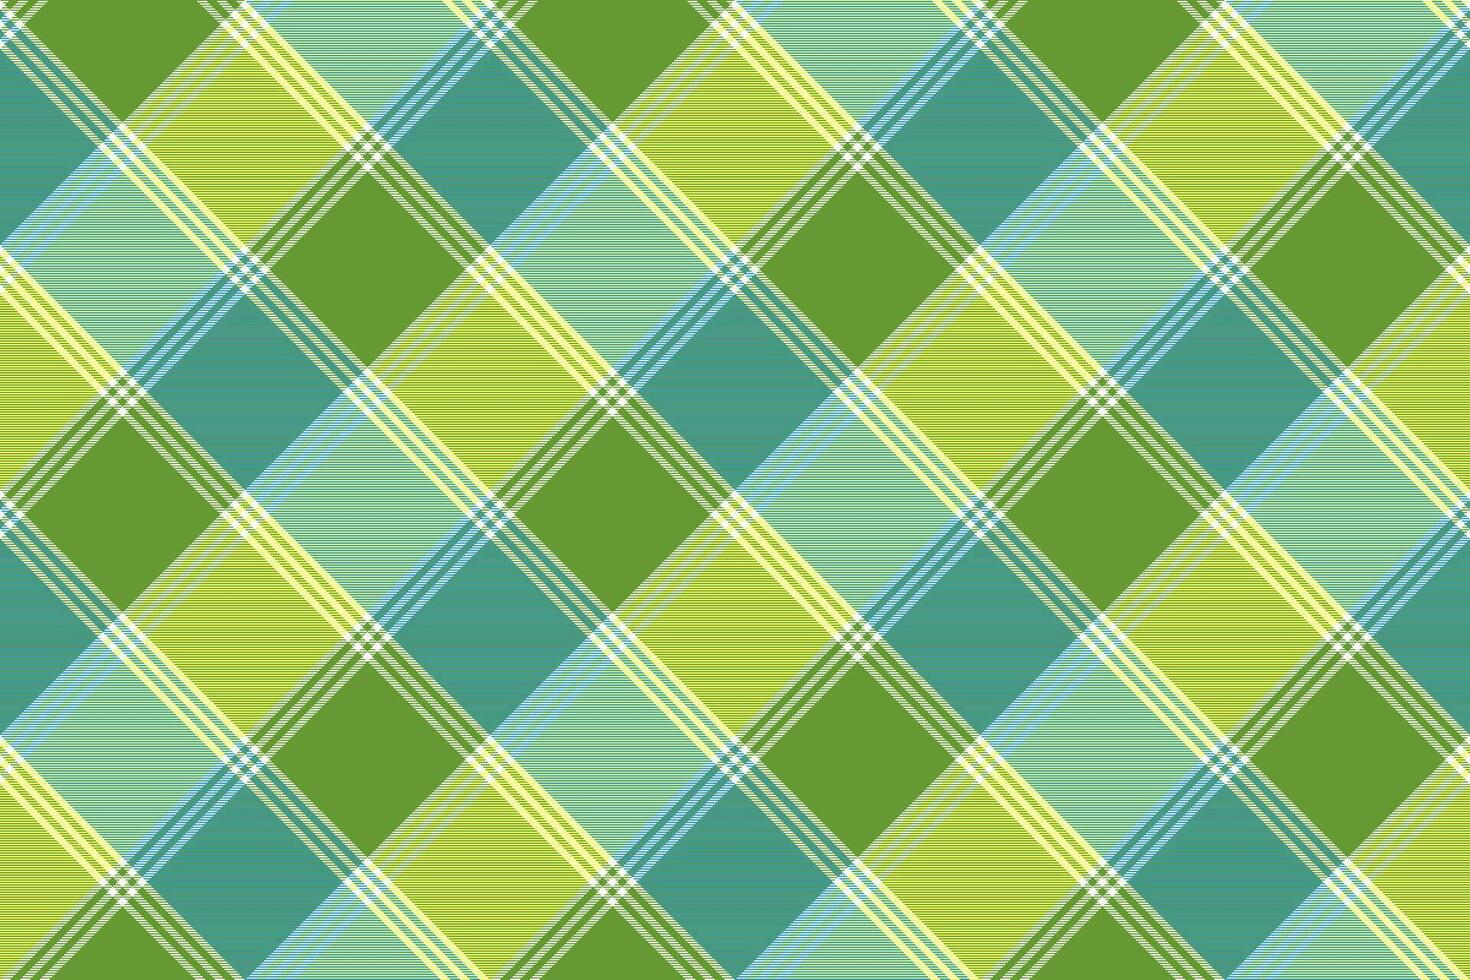 Lite color check tablecloth seamless pattern vector